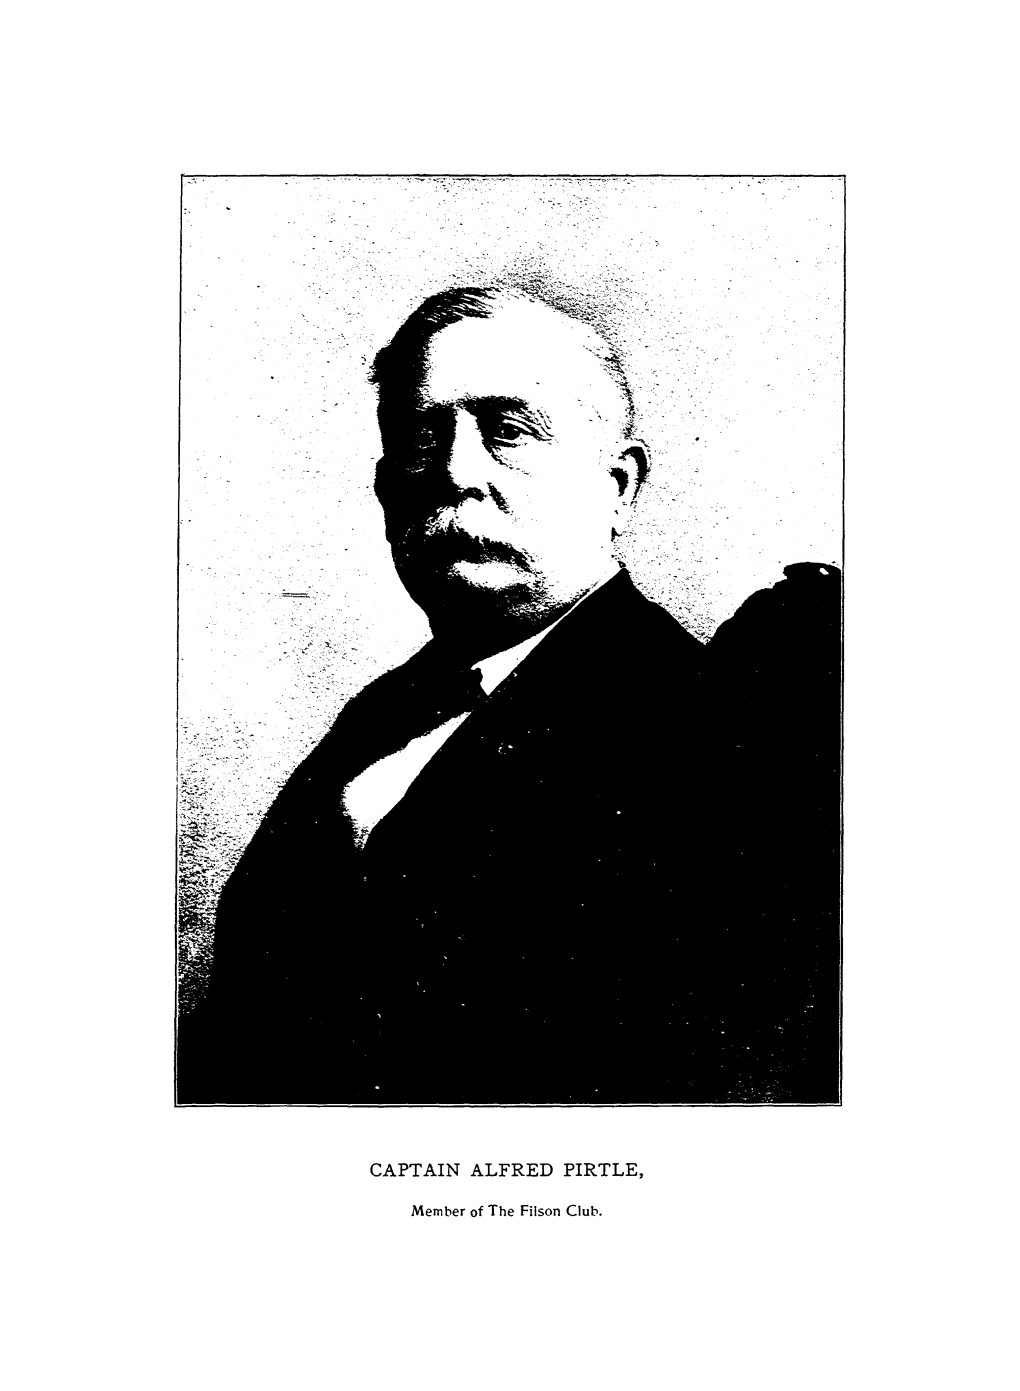 Captain Alfred Pirtle